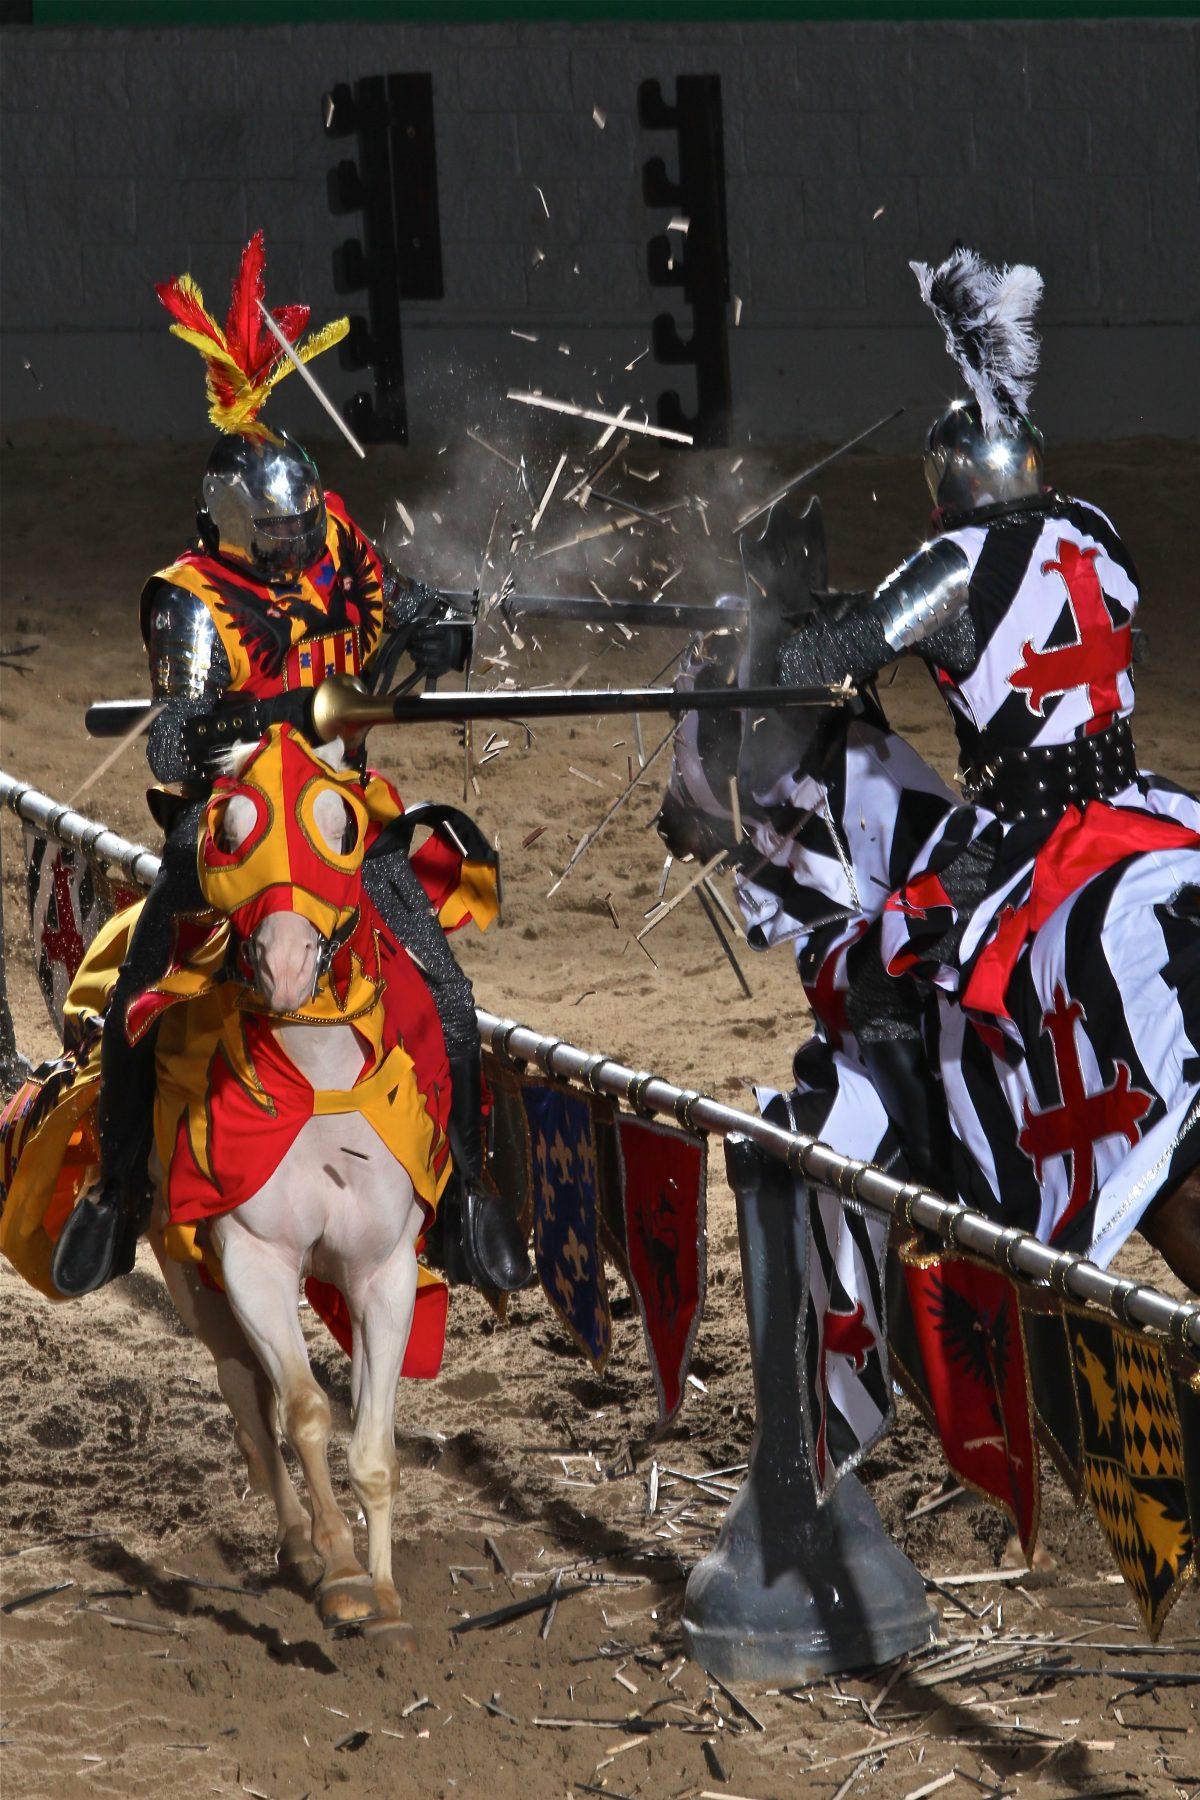 Knights at Medieval Times joust. (Courtesy of Medieval Times)